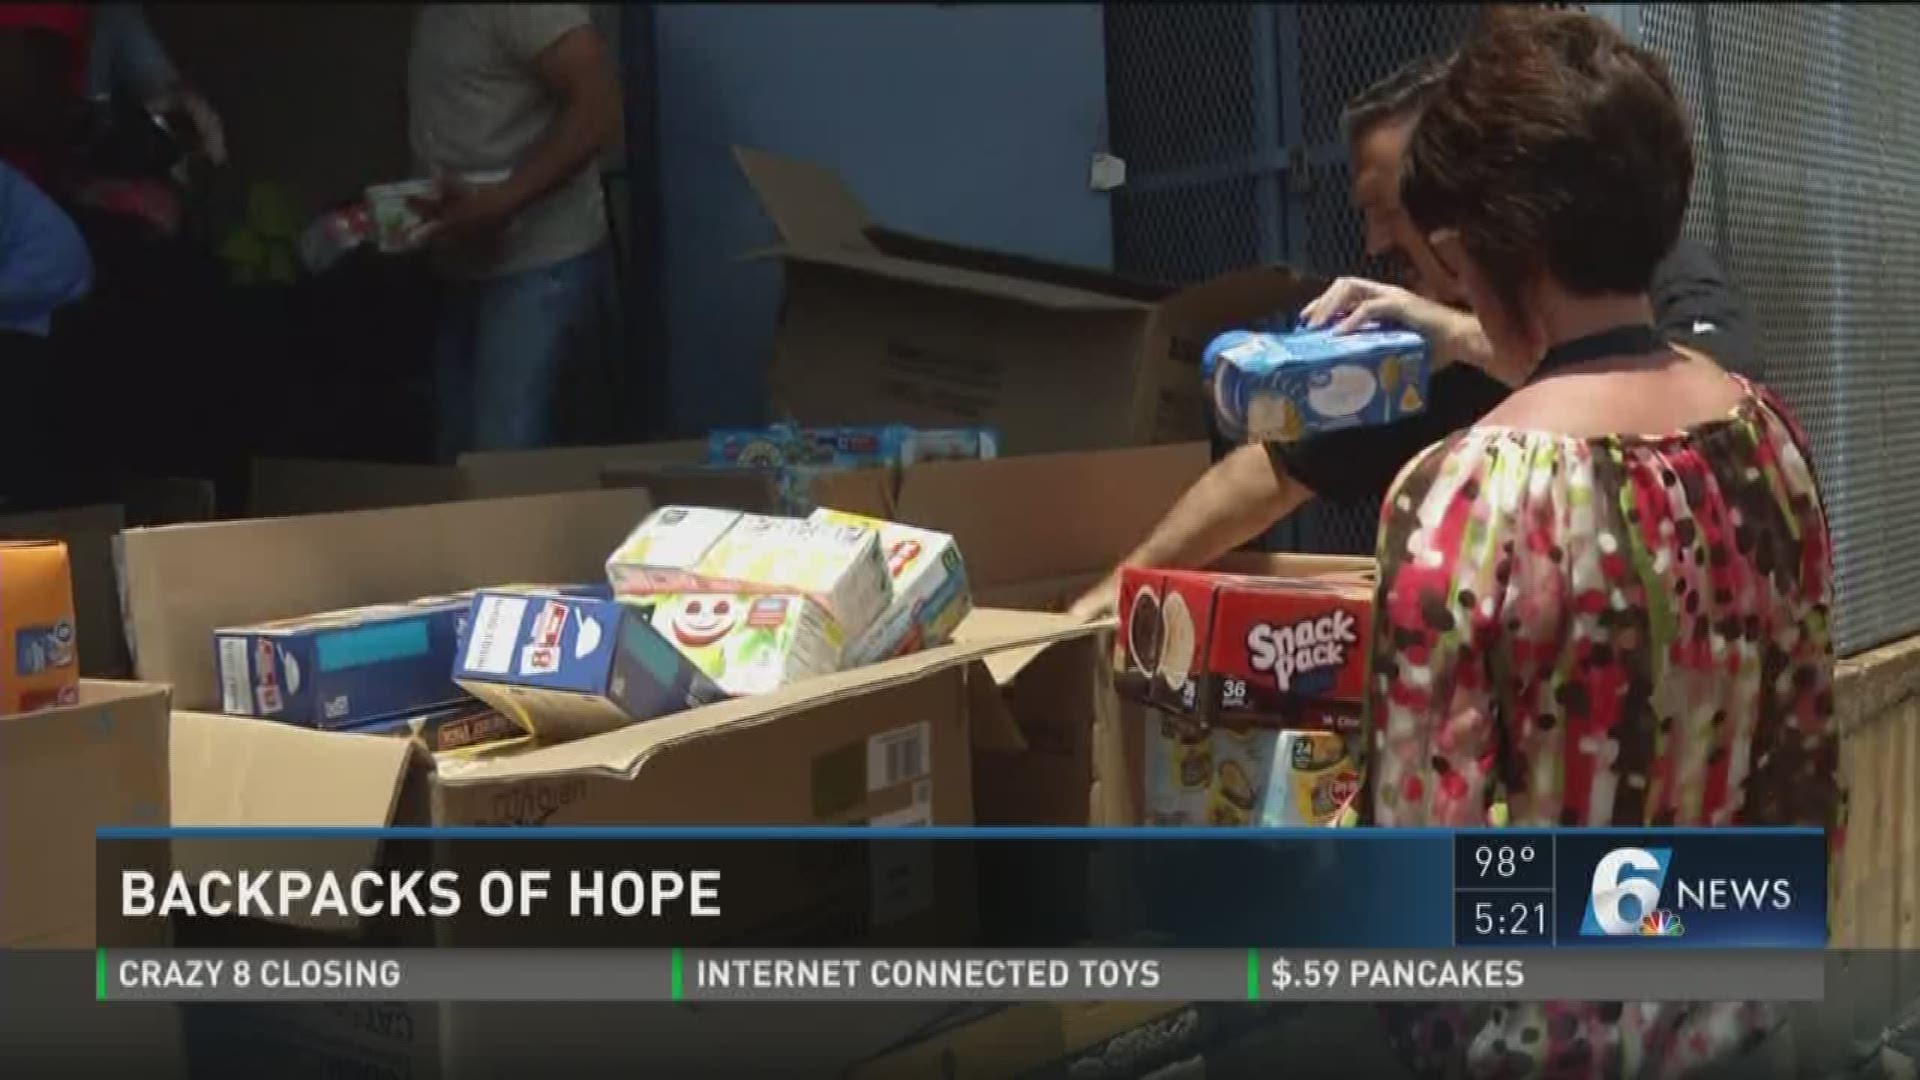 The Backpacks of Hope program provides children in need backpacks full of food so they don't go hungry.